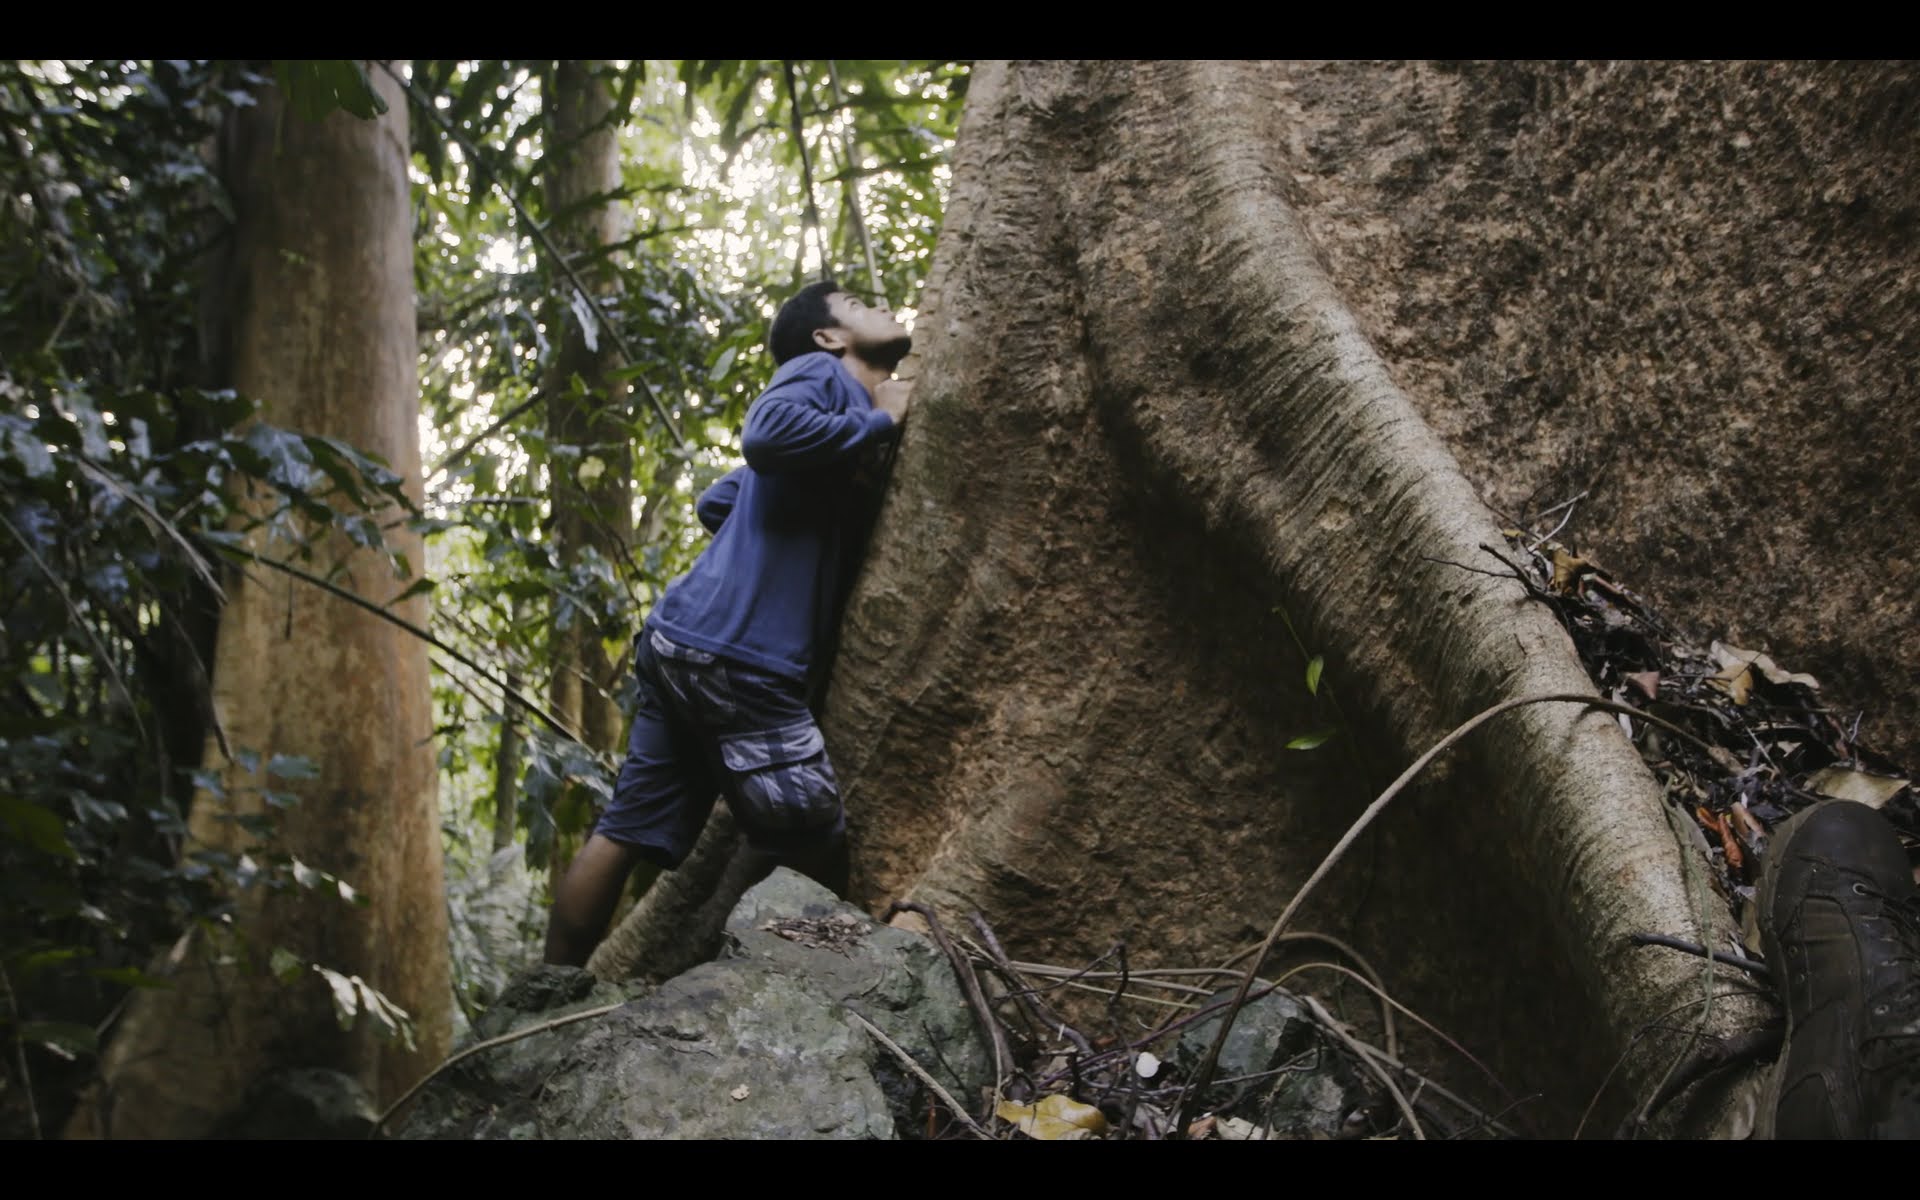 Para-enforcer Roy Arguelles inspects a giant tree in Palawan's rainforests. From Karl Malakunas' 'Delikado.' Photo: Delikado LLC